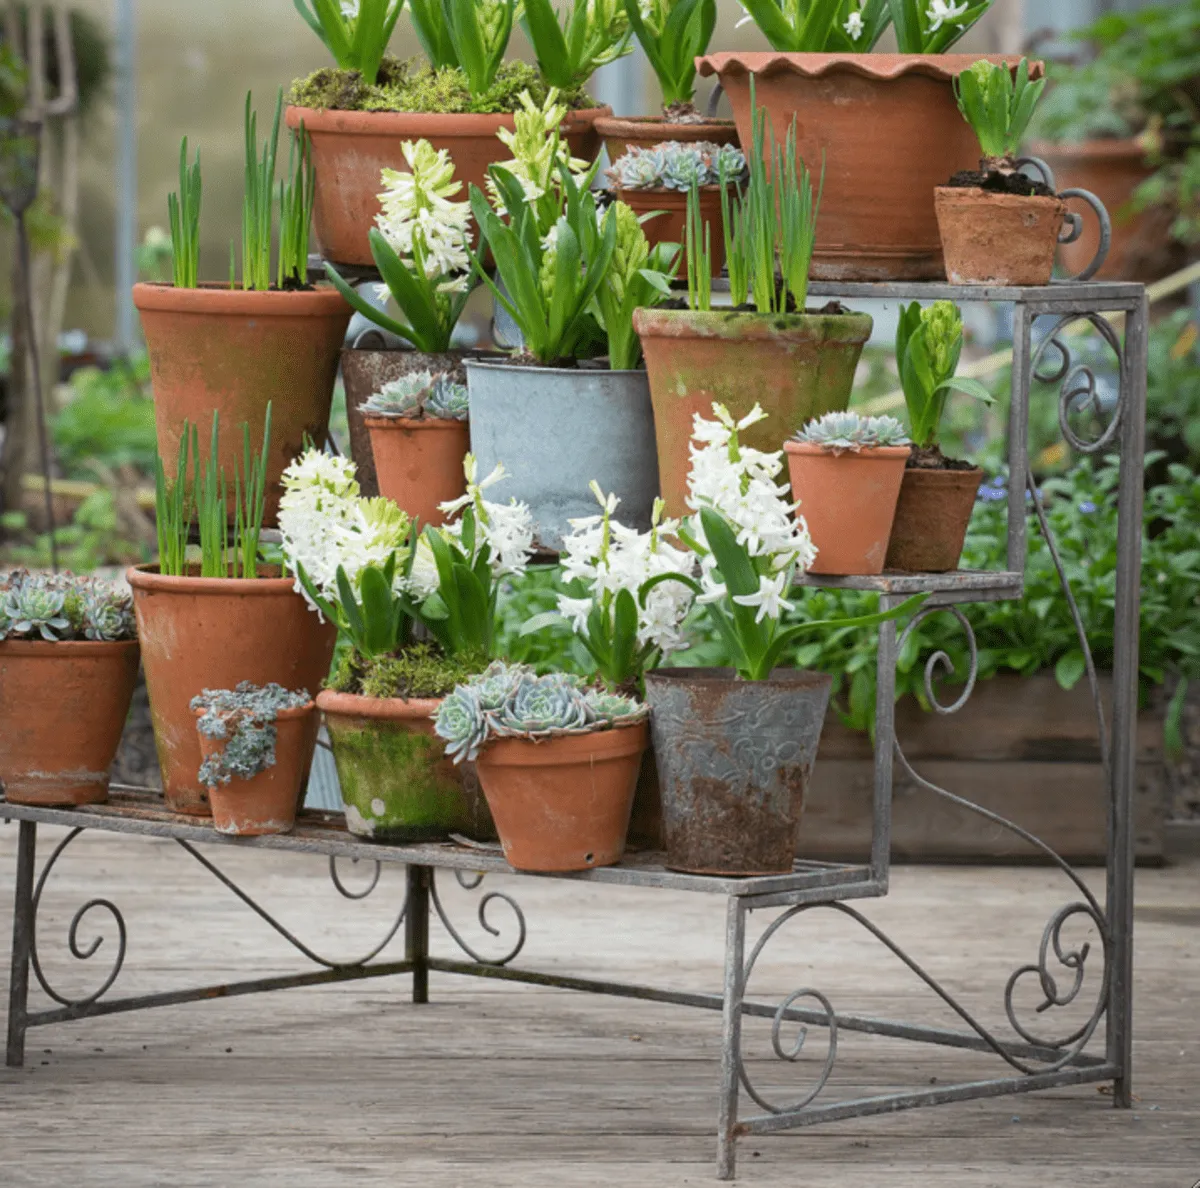 Decorative metal three-tiered plant stand displaying plants in terracotta pots